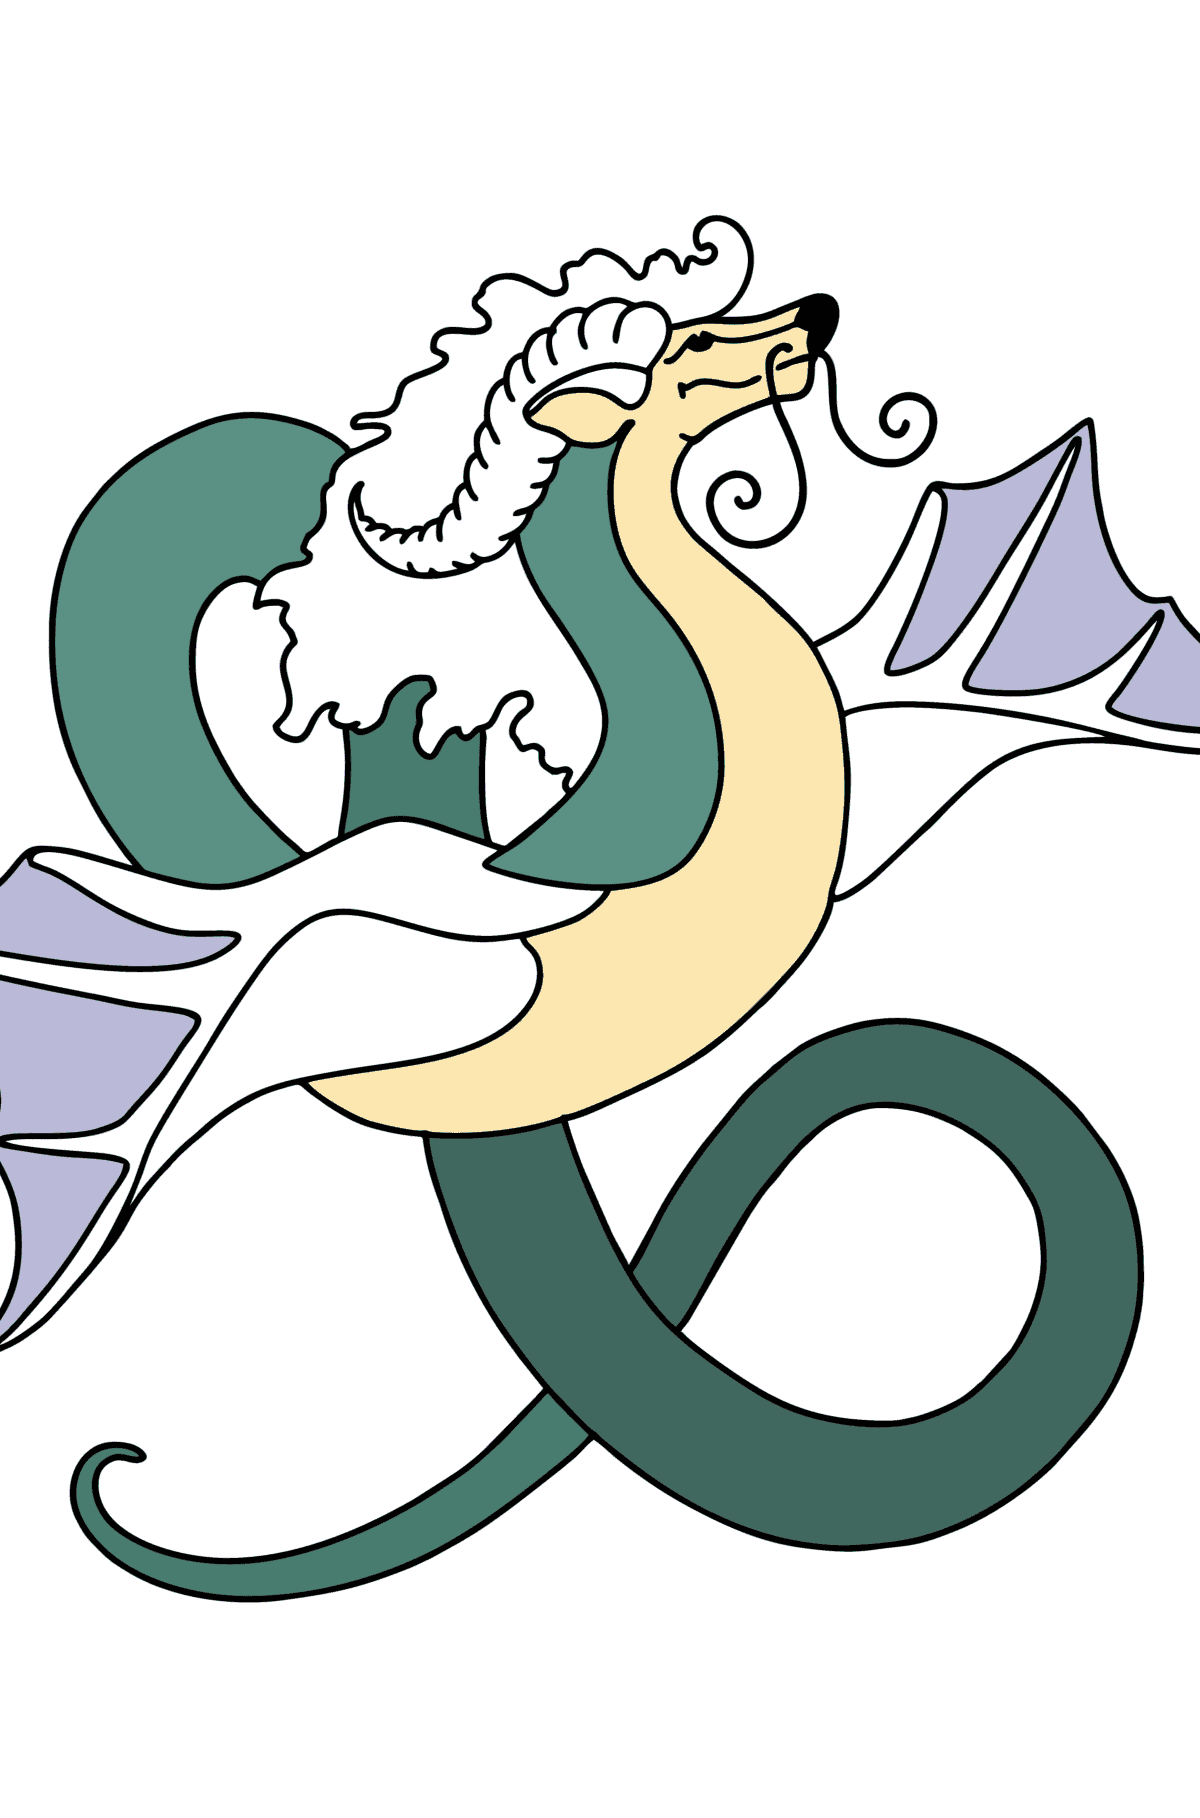 Flying Dragon coloring page - Coloring Pages for Kids